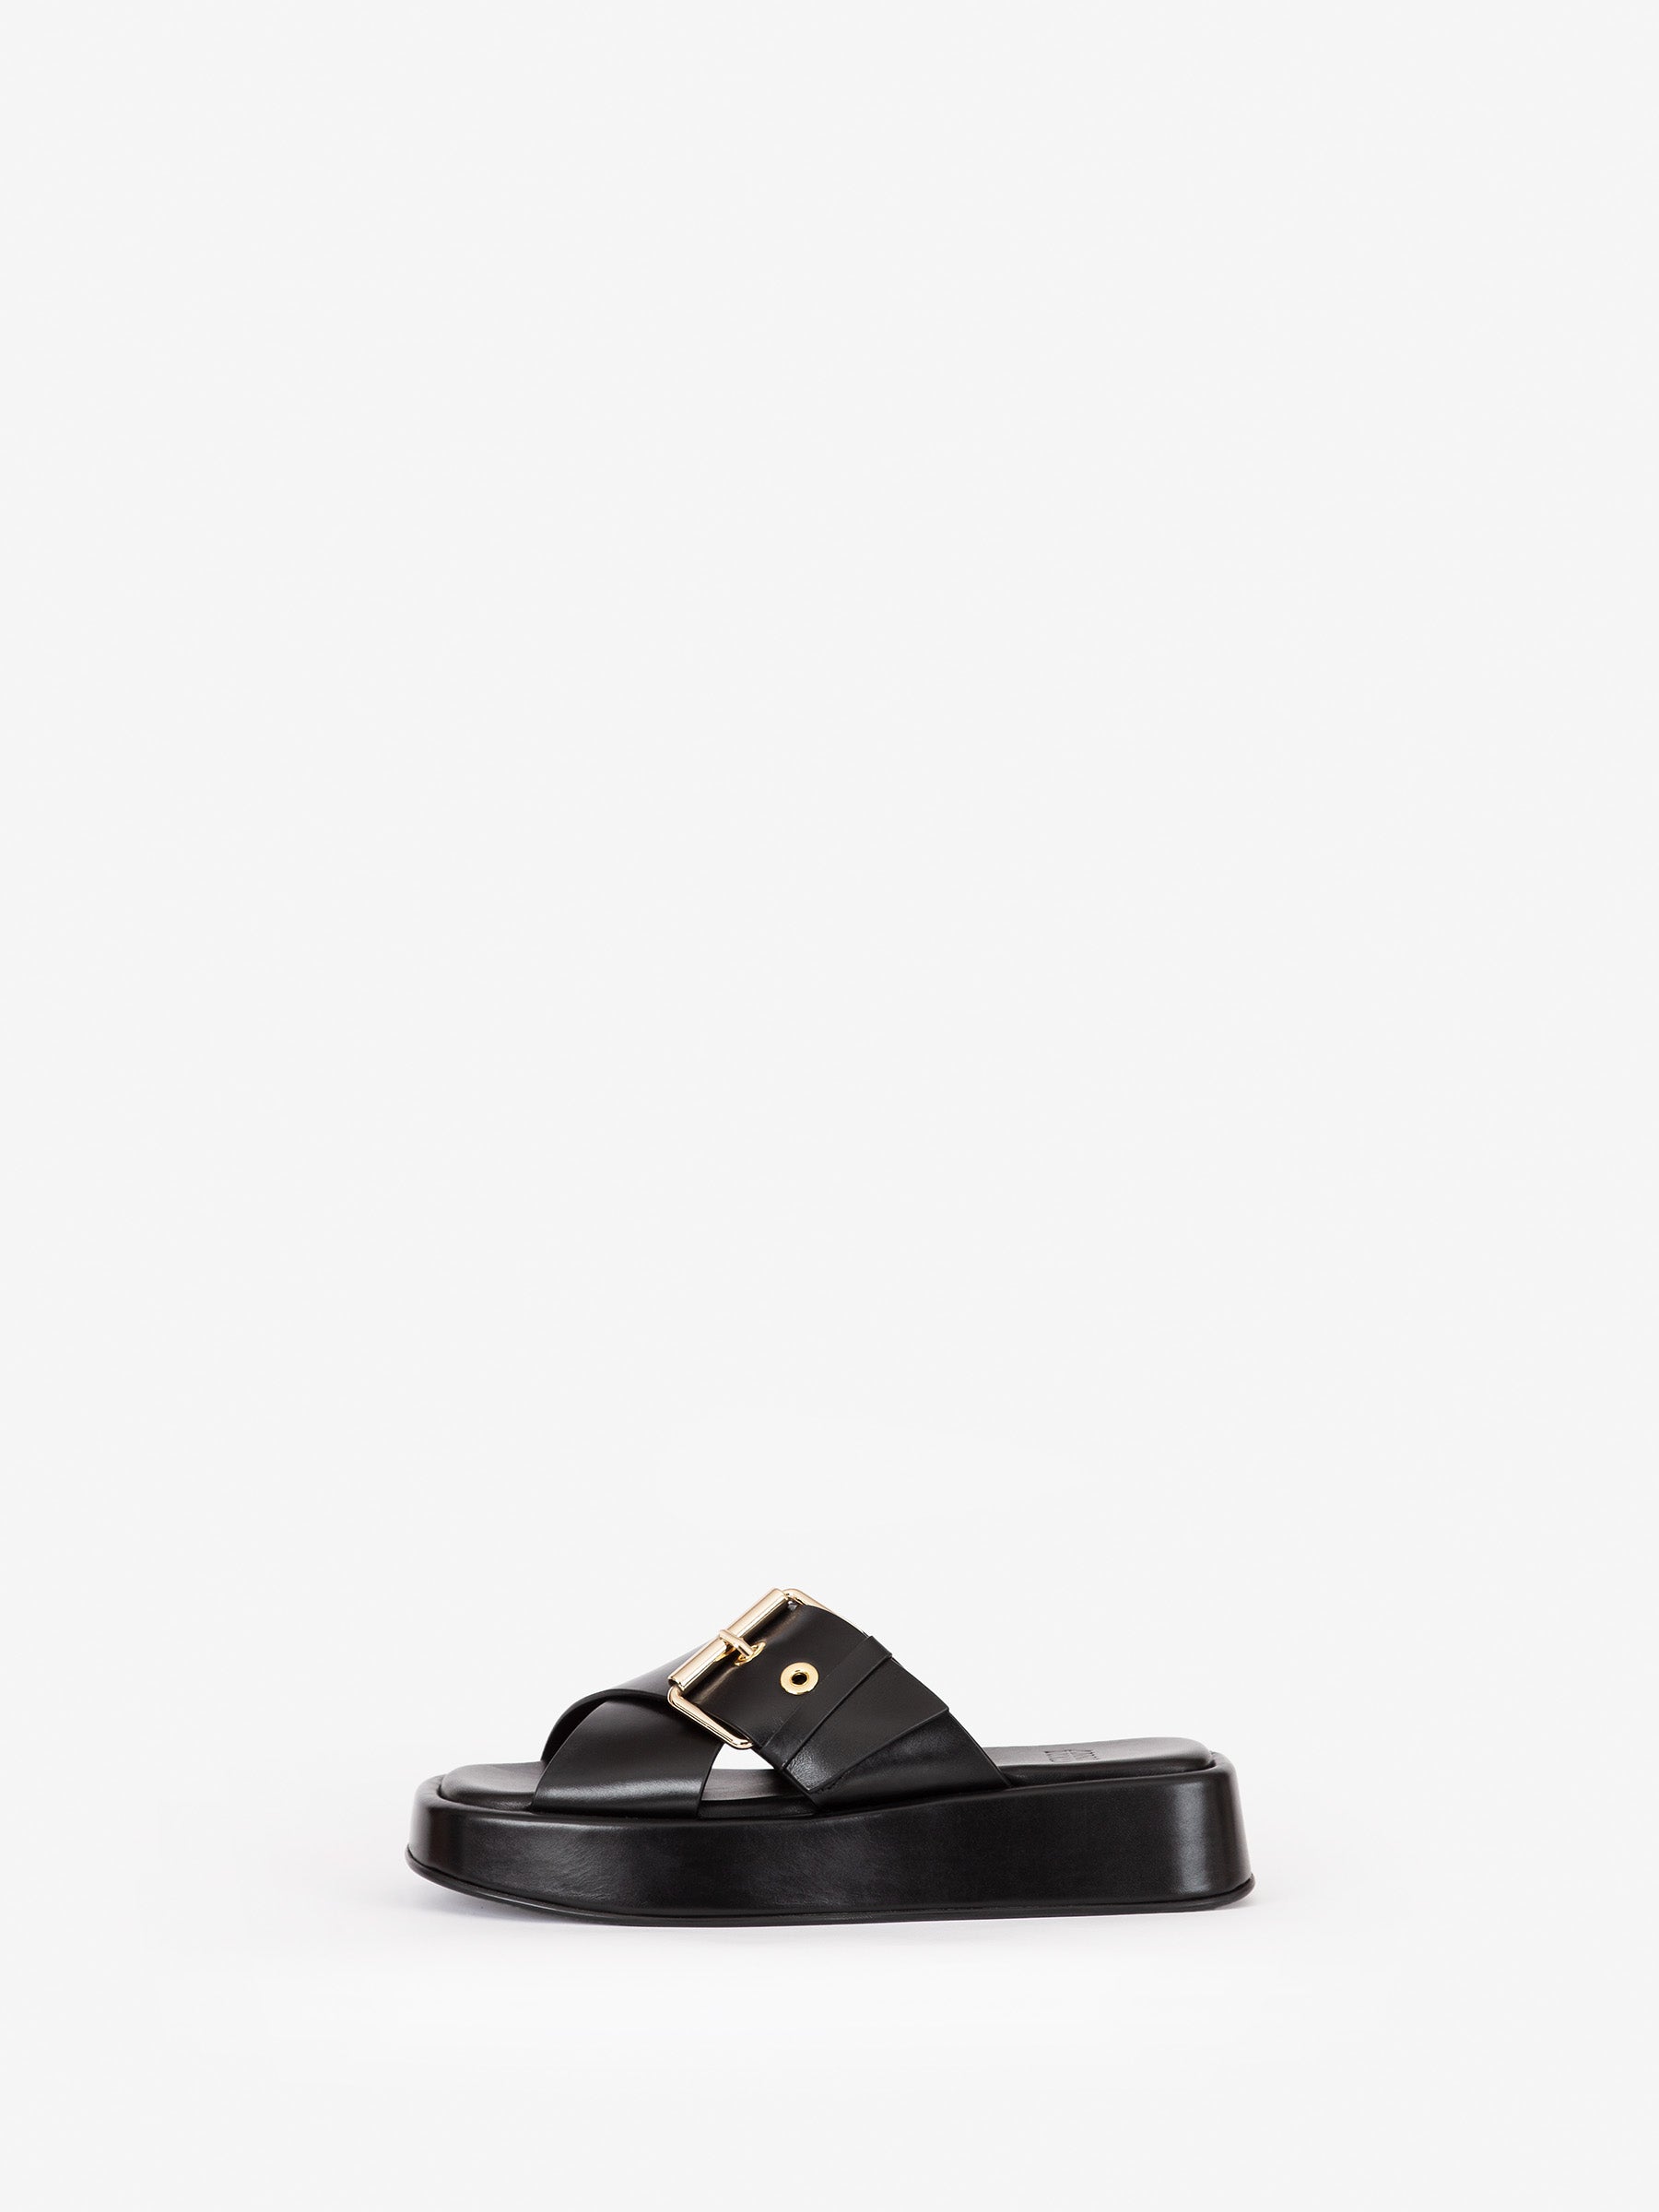 Black chunky "DETOX" flatform sandal from Swedish premium shoe brand ANNY NORD with heavy gold trims for an everyday splash of luxe.